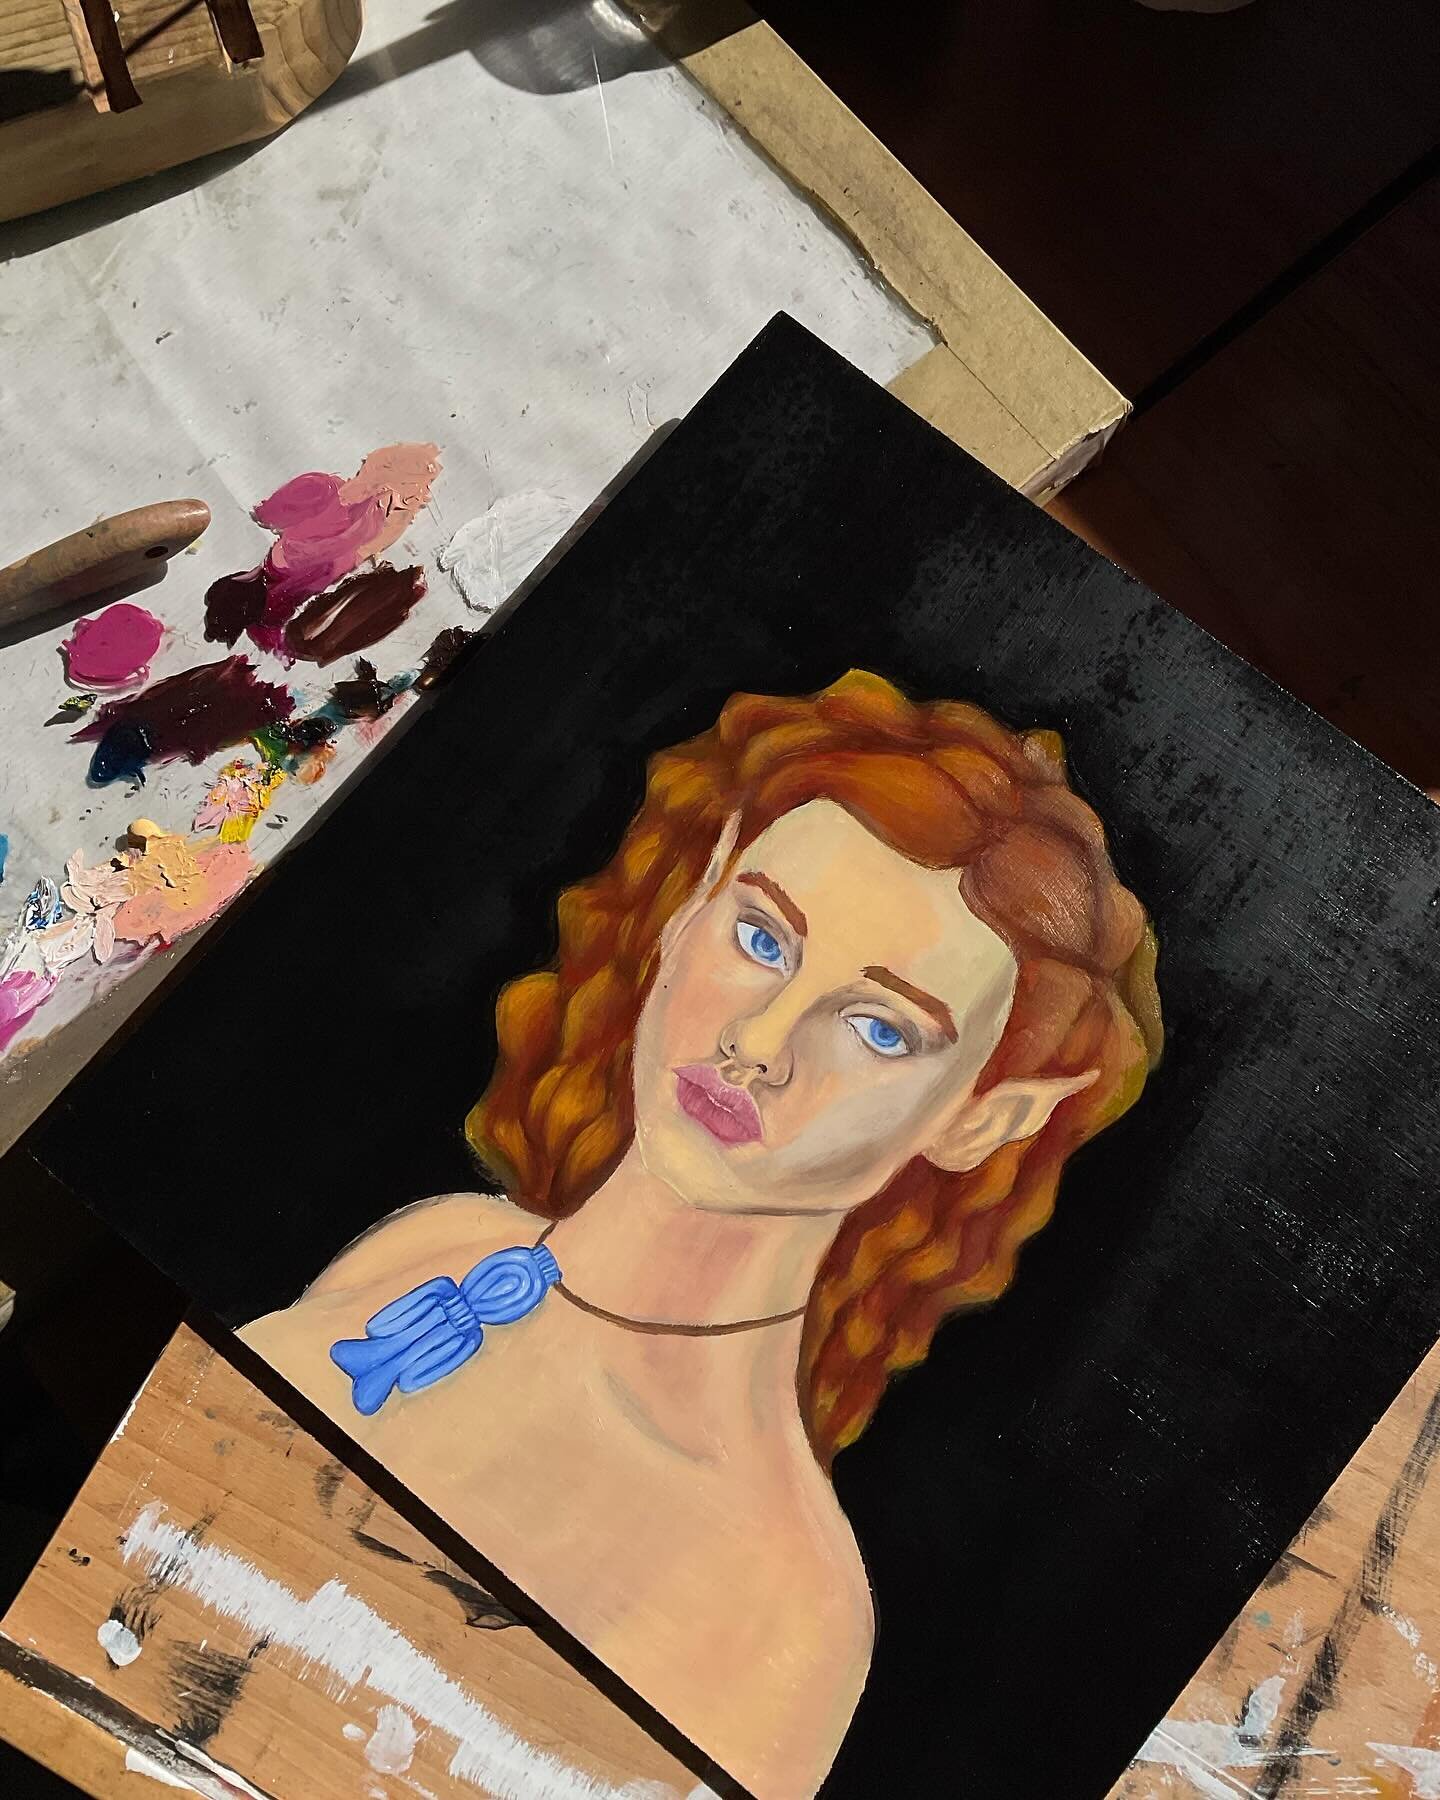 ✨SHINY FRIDAY✨ discount time!! and the sun decided to show up today so I am also sharing some of the process of &ldquo;Tyet&rdquo; so far!

I am loving to paint her hair but I&rsquo;ve been waiting for the background to dry for almost a week now 🫠

